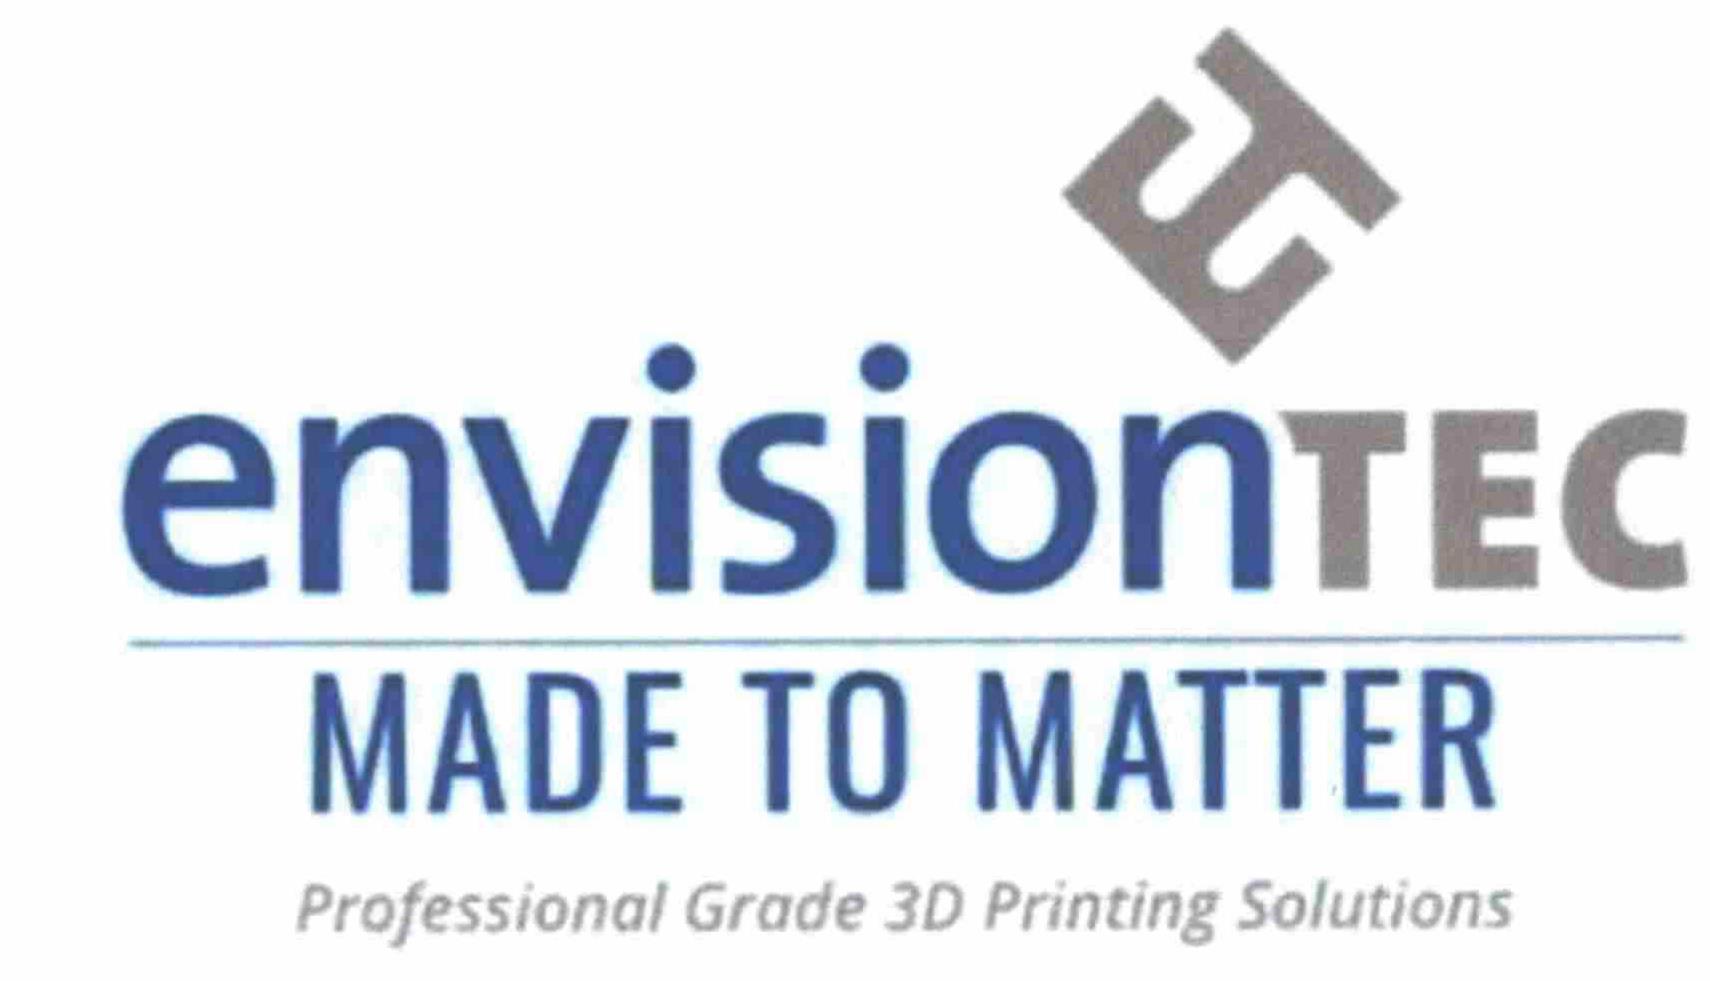  ET ENVISIONTEC MADE TO MATTER PROFESSIONAL GRADE 3D PRINTING SOLUTIONS